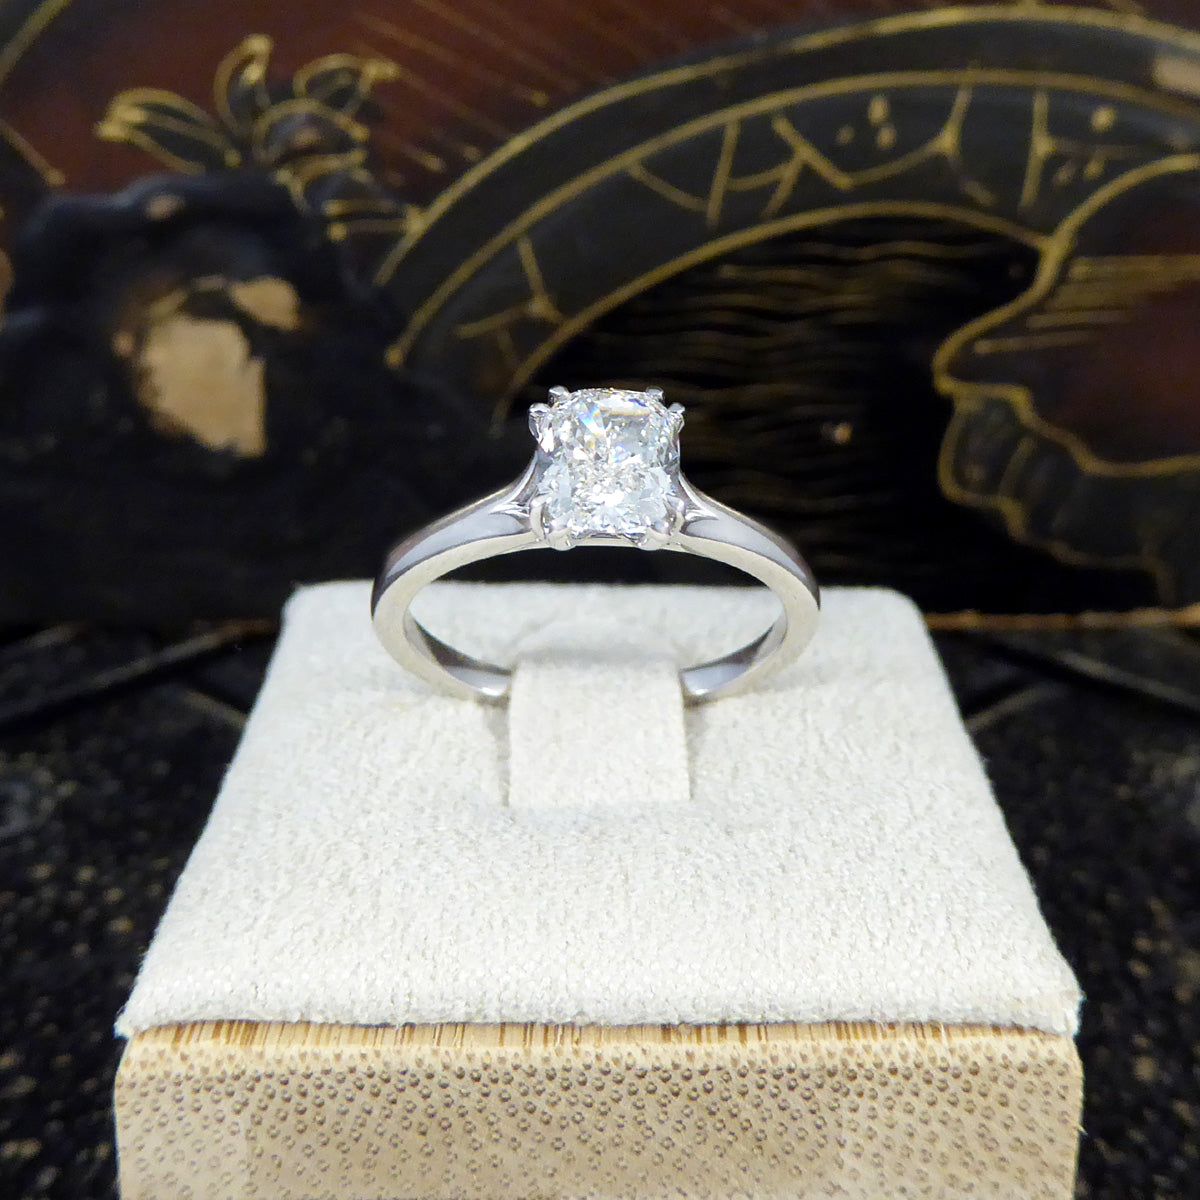 1.00ct Cushion Modified Brilliant Cut Diamond Solitaire Engagement Ring in 18ct White Gold